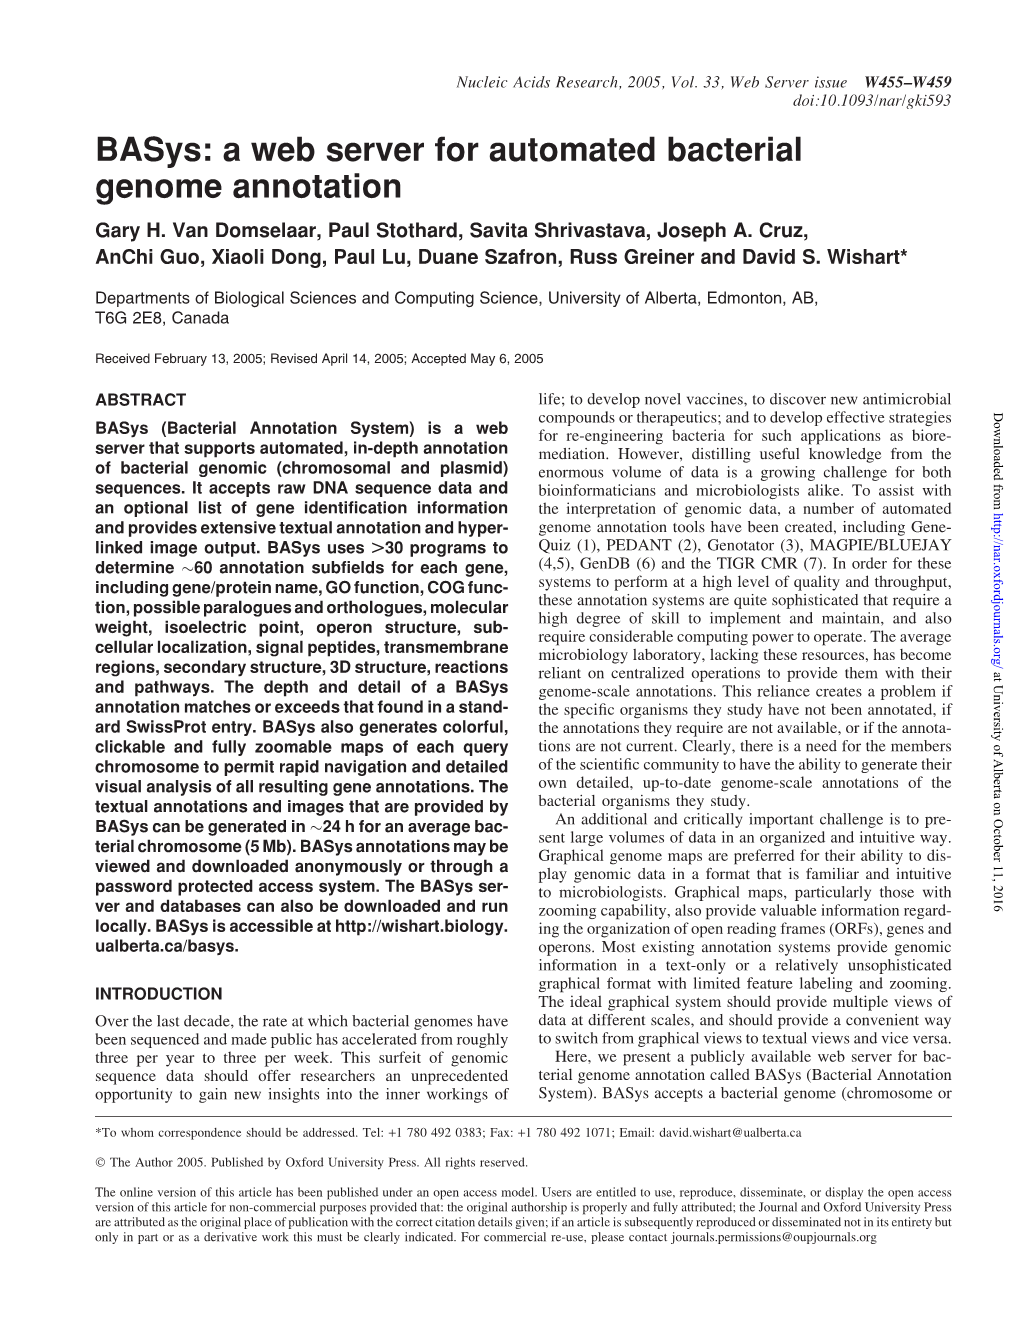 Basys: a Web Server for Automated Bacterial Genome Annotation Gary H